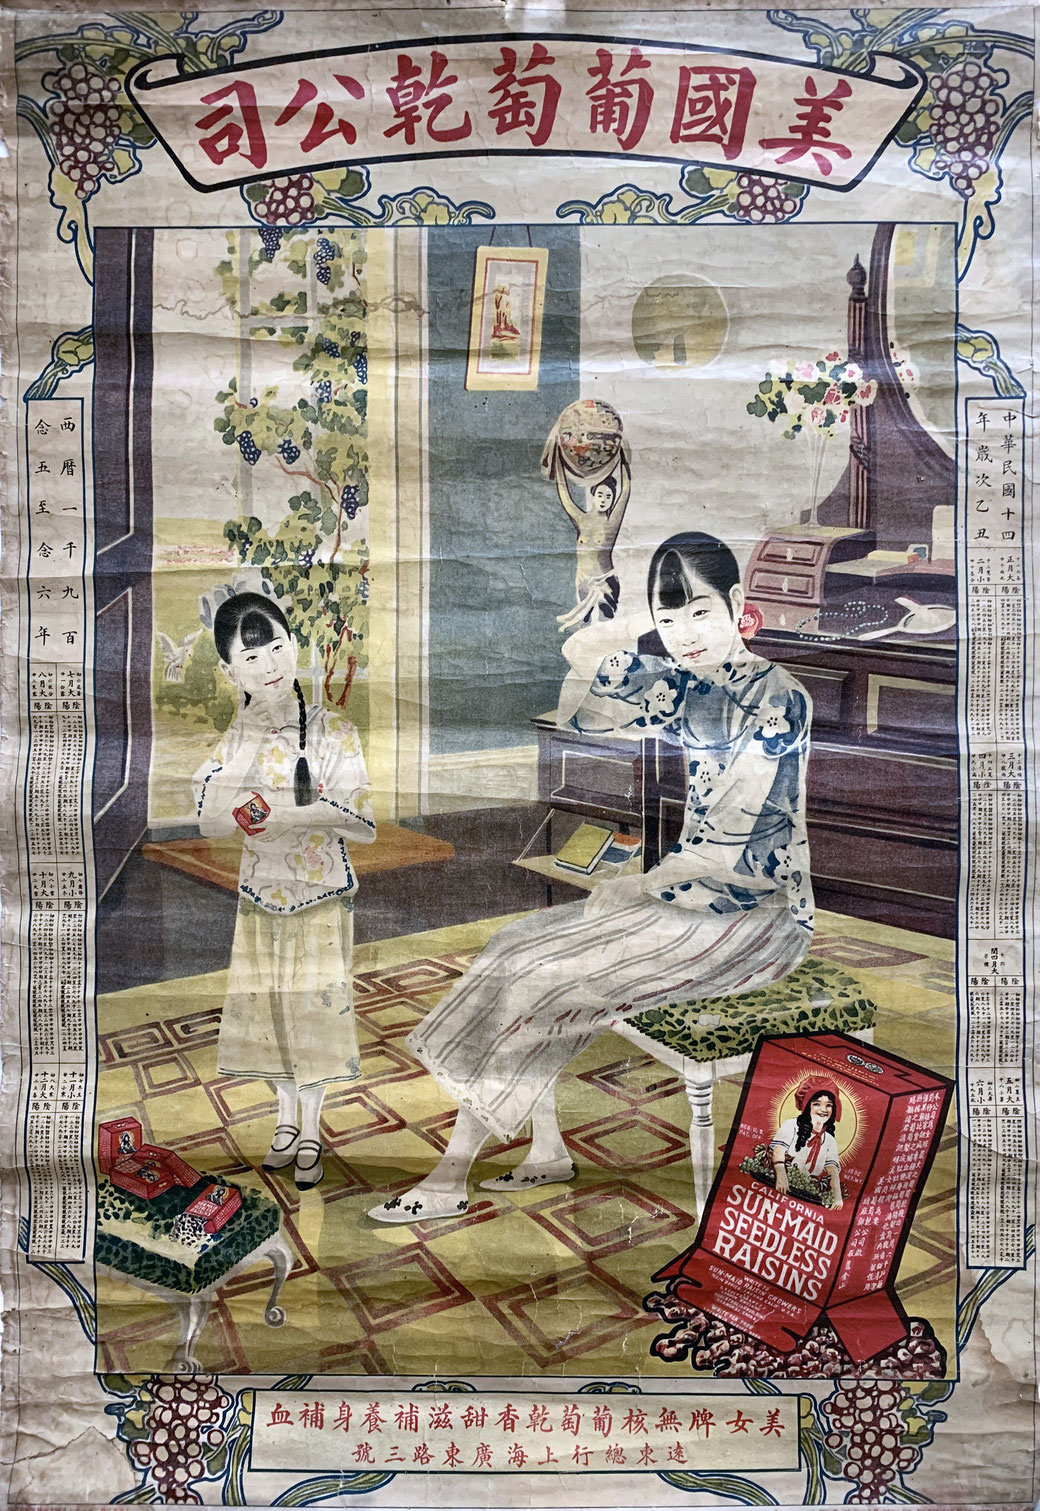 1925 Shanghai calendar poster advertising for Sun-Maid raisins created by Carl Crow from the MOFBA collection